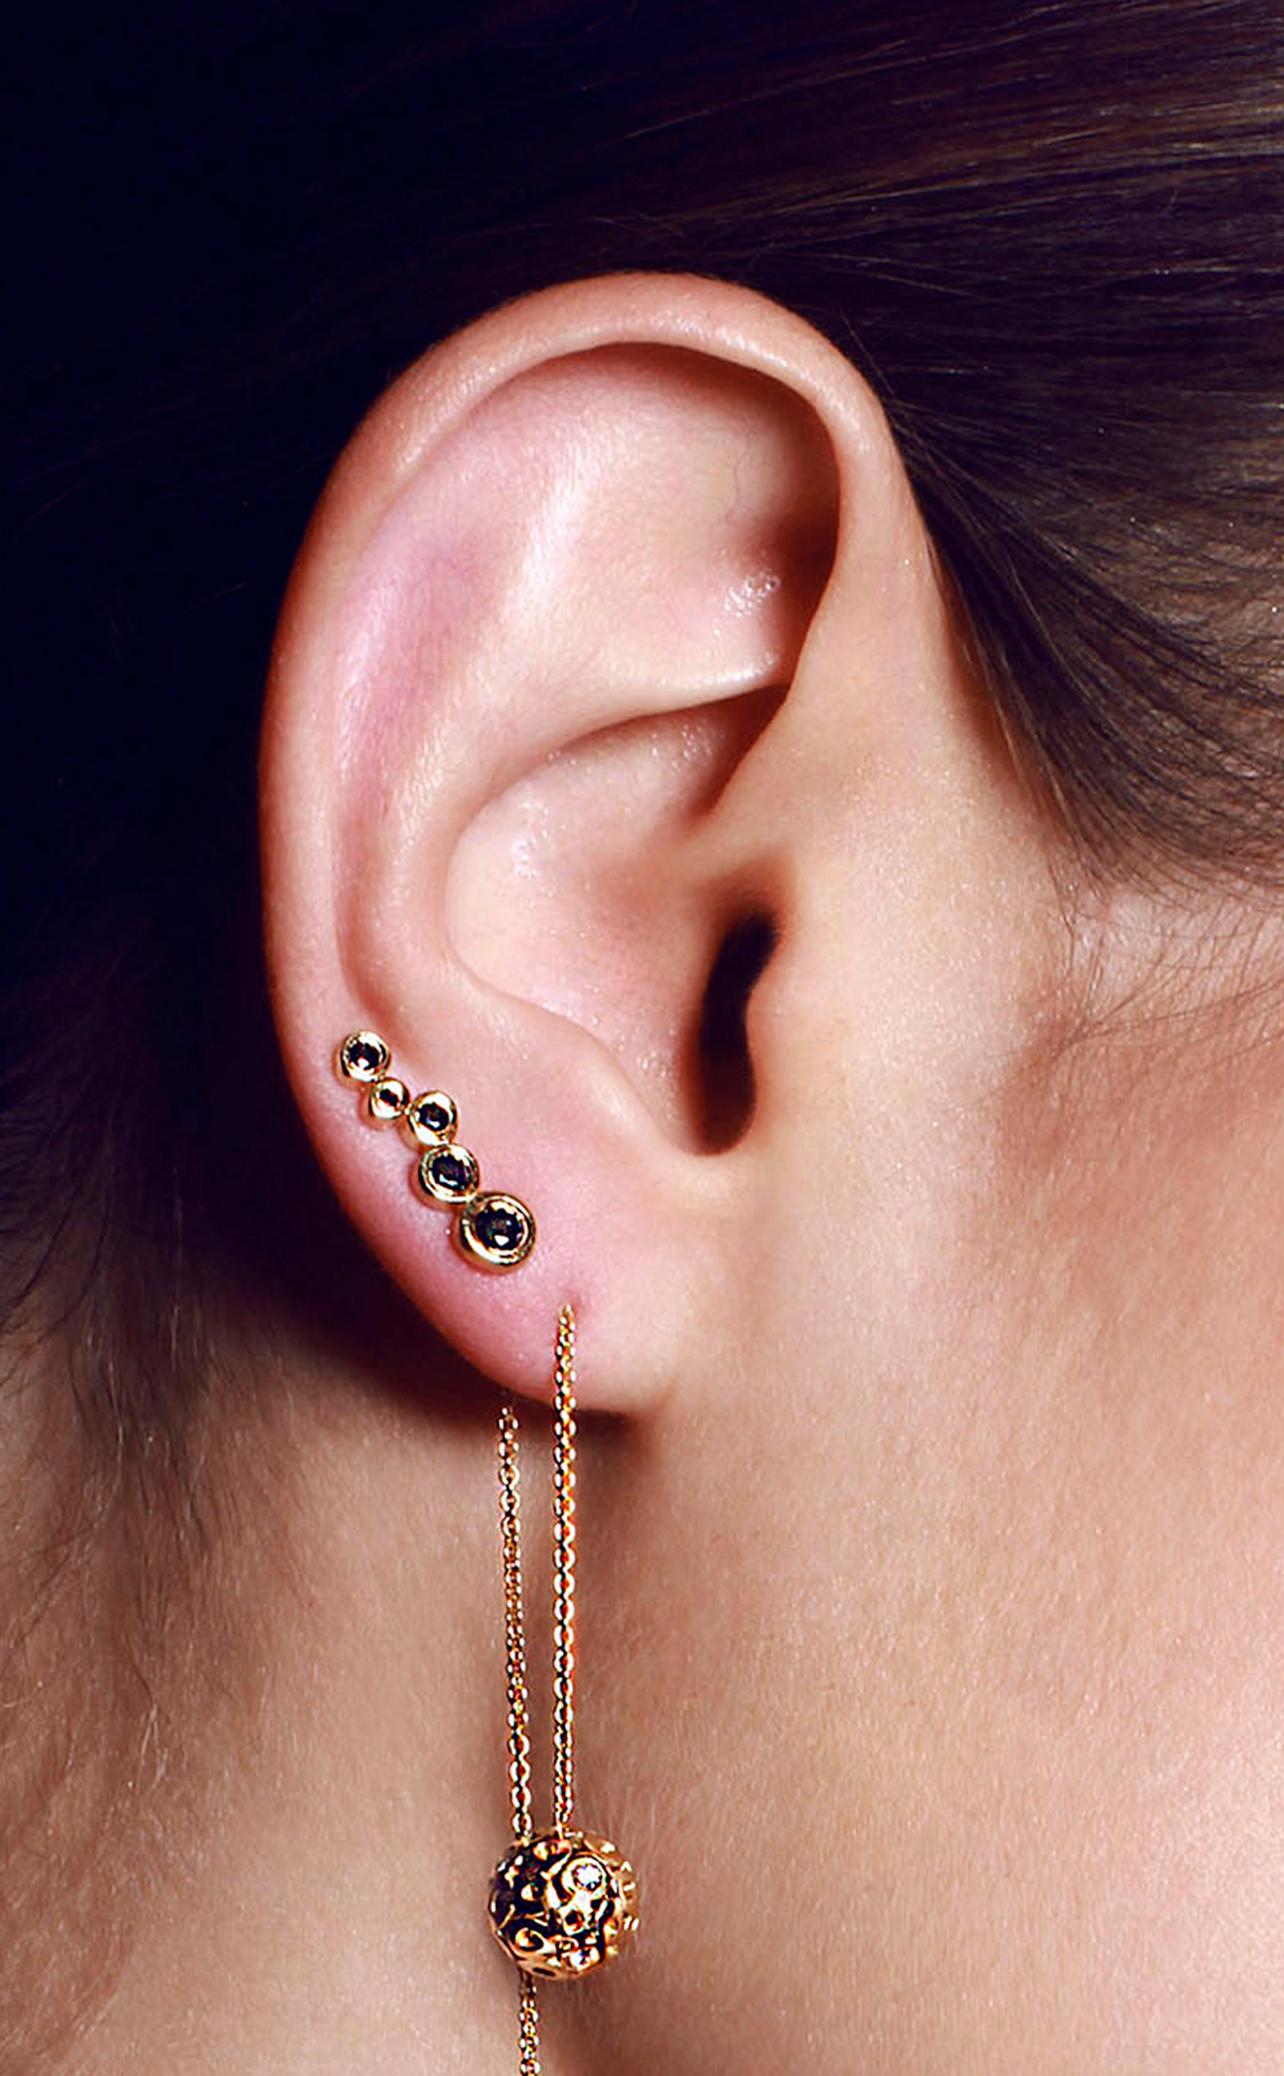 Wear this long linear climber earring with trickling down black diamonds to switch
things up between your everyday basic stud earring.

Inspired by seeing the cross-section view of life, as if slicing a tree to see its underlying structure and raw